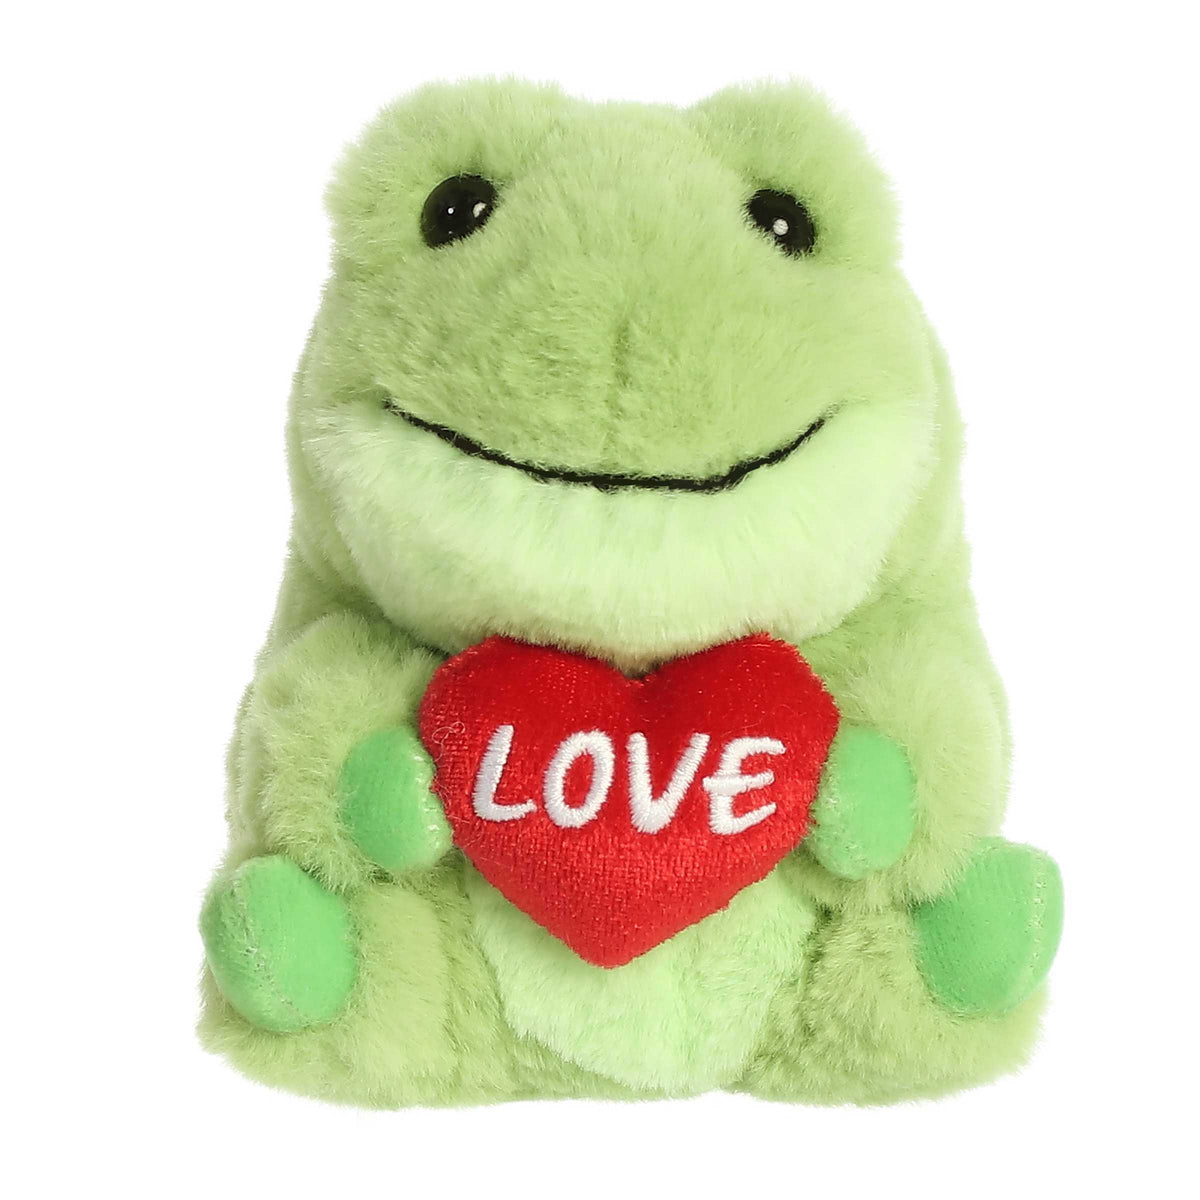 Green Love Frog plush from Rolly Pets, holding a ‘Love’ heart, in a playful pose. Perfect for Valentine's Day cuddles